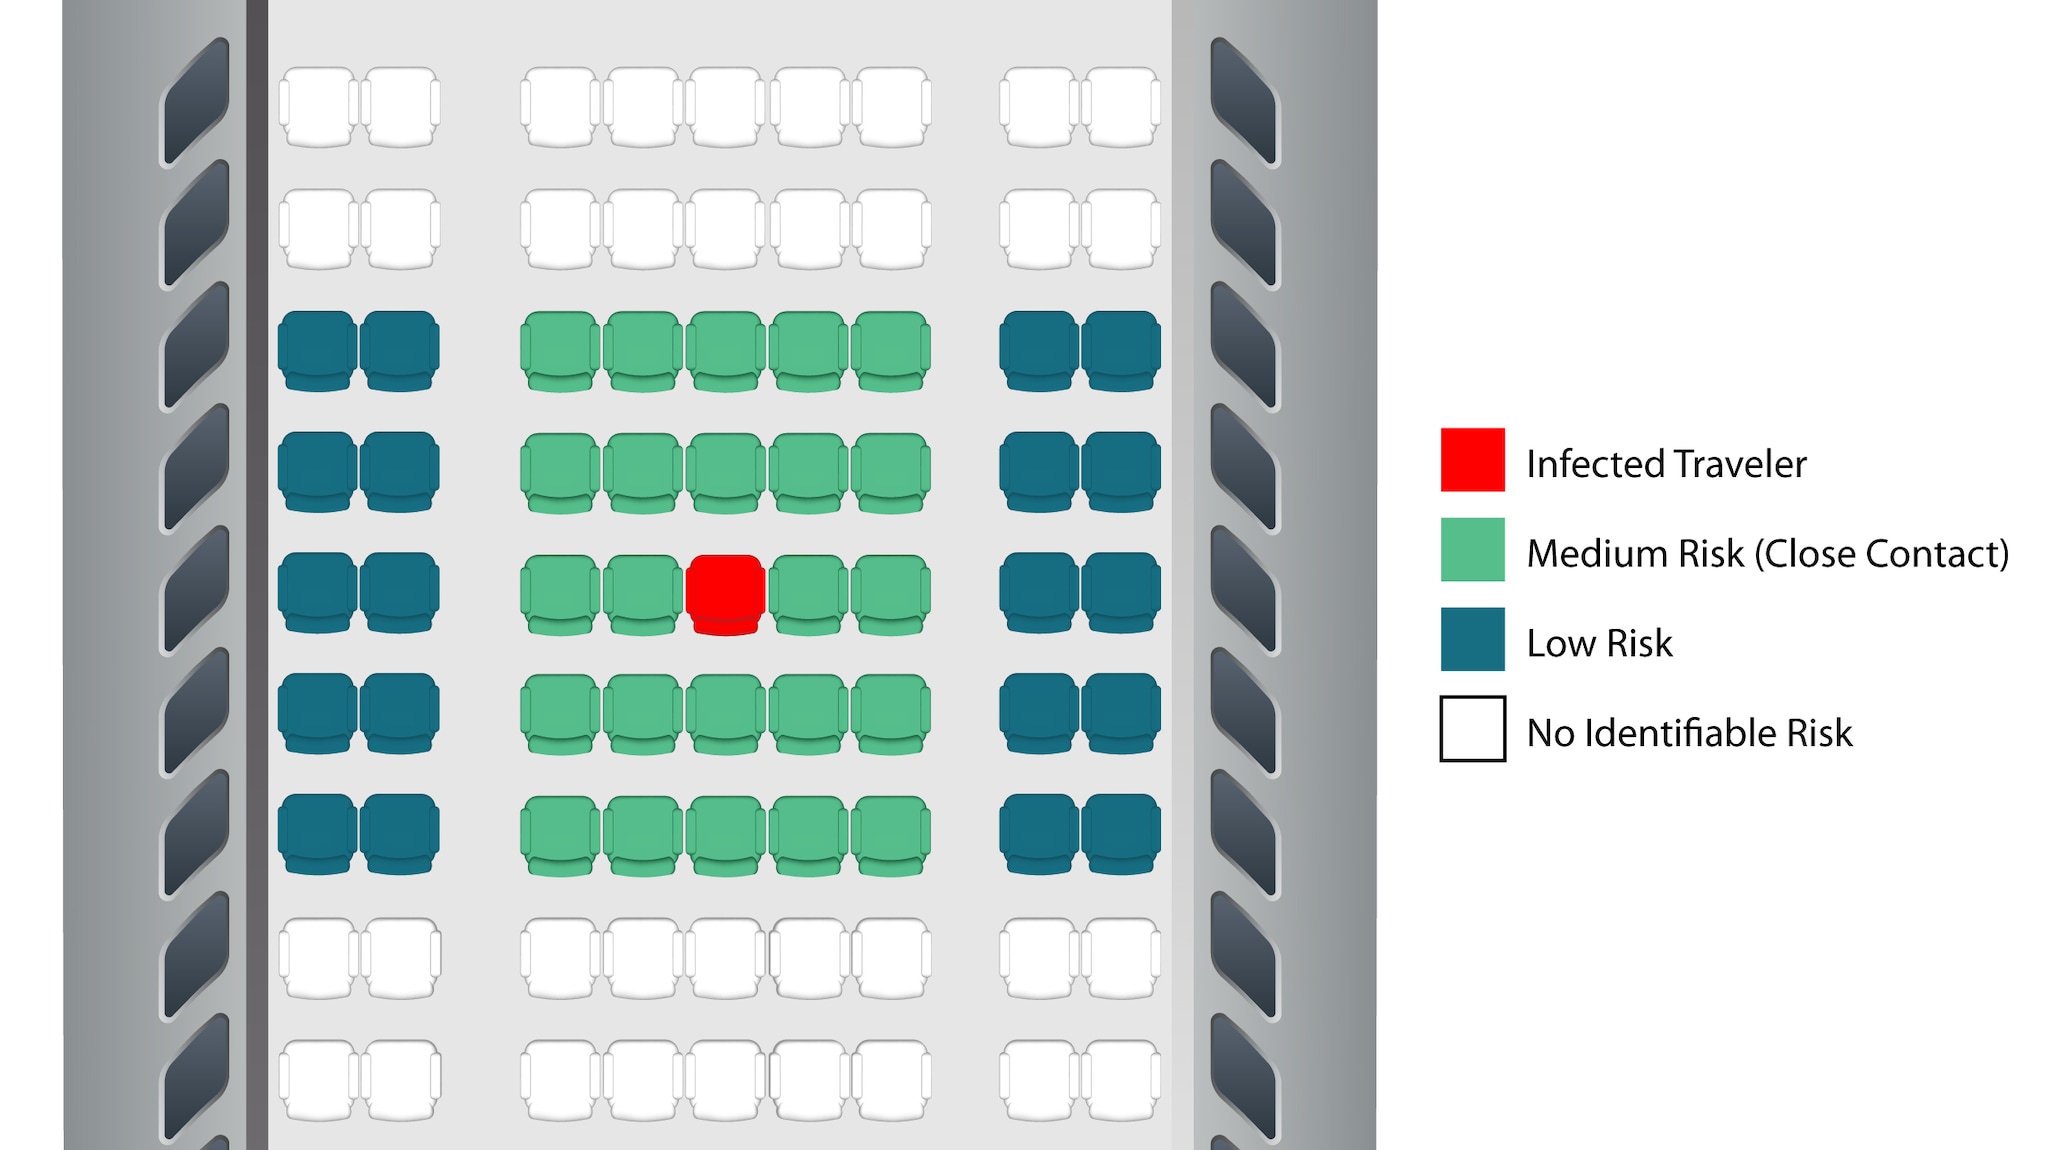 Sample seating chart for a 2019-nCoV aircraft contact investigation showing risk levels based on distance from the infected traveler.